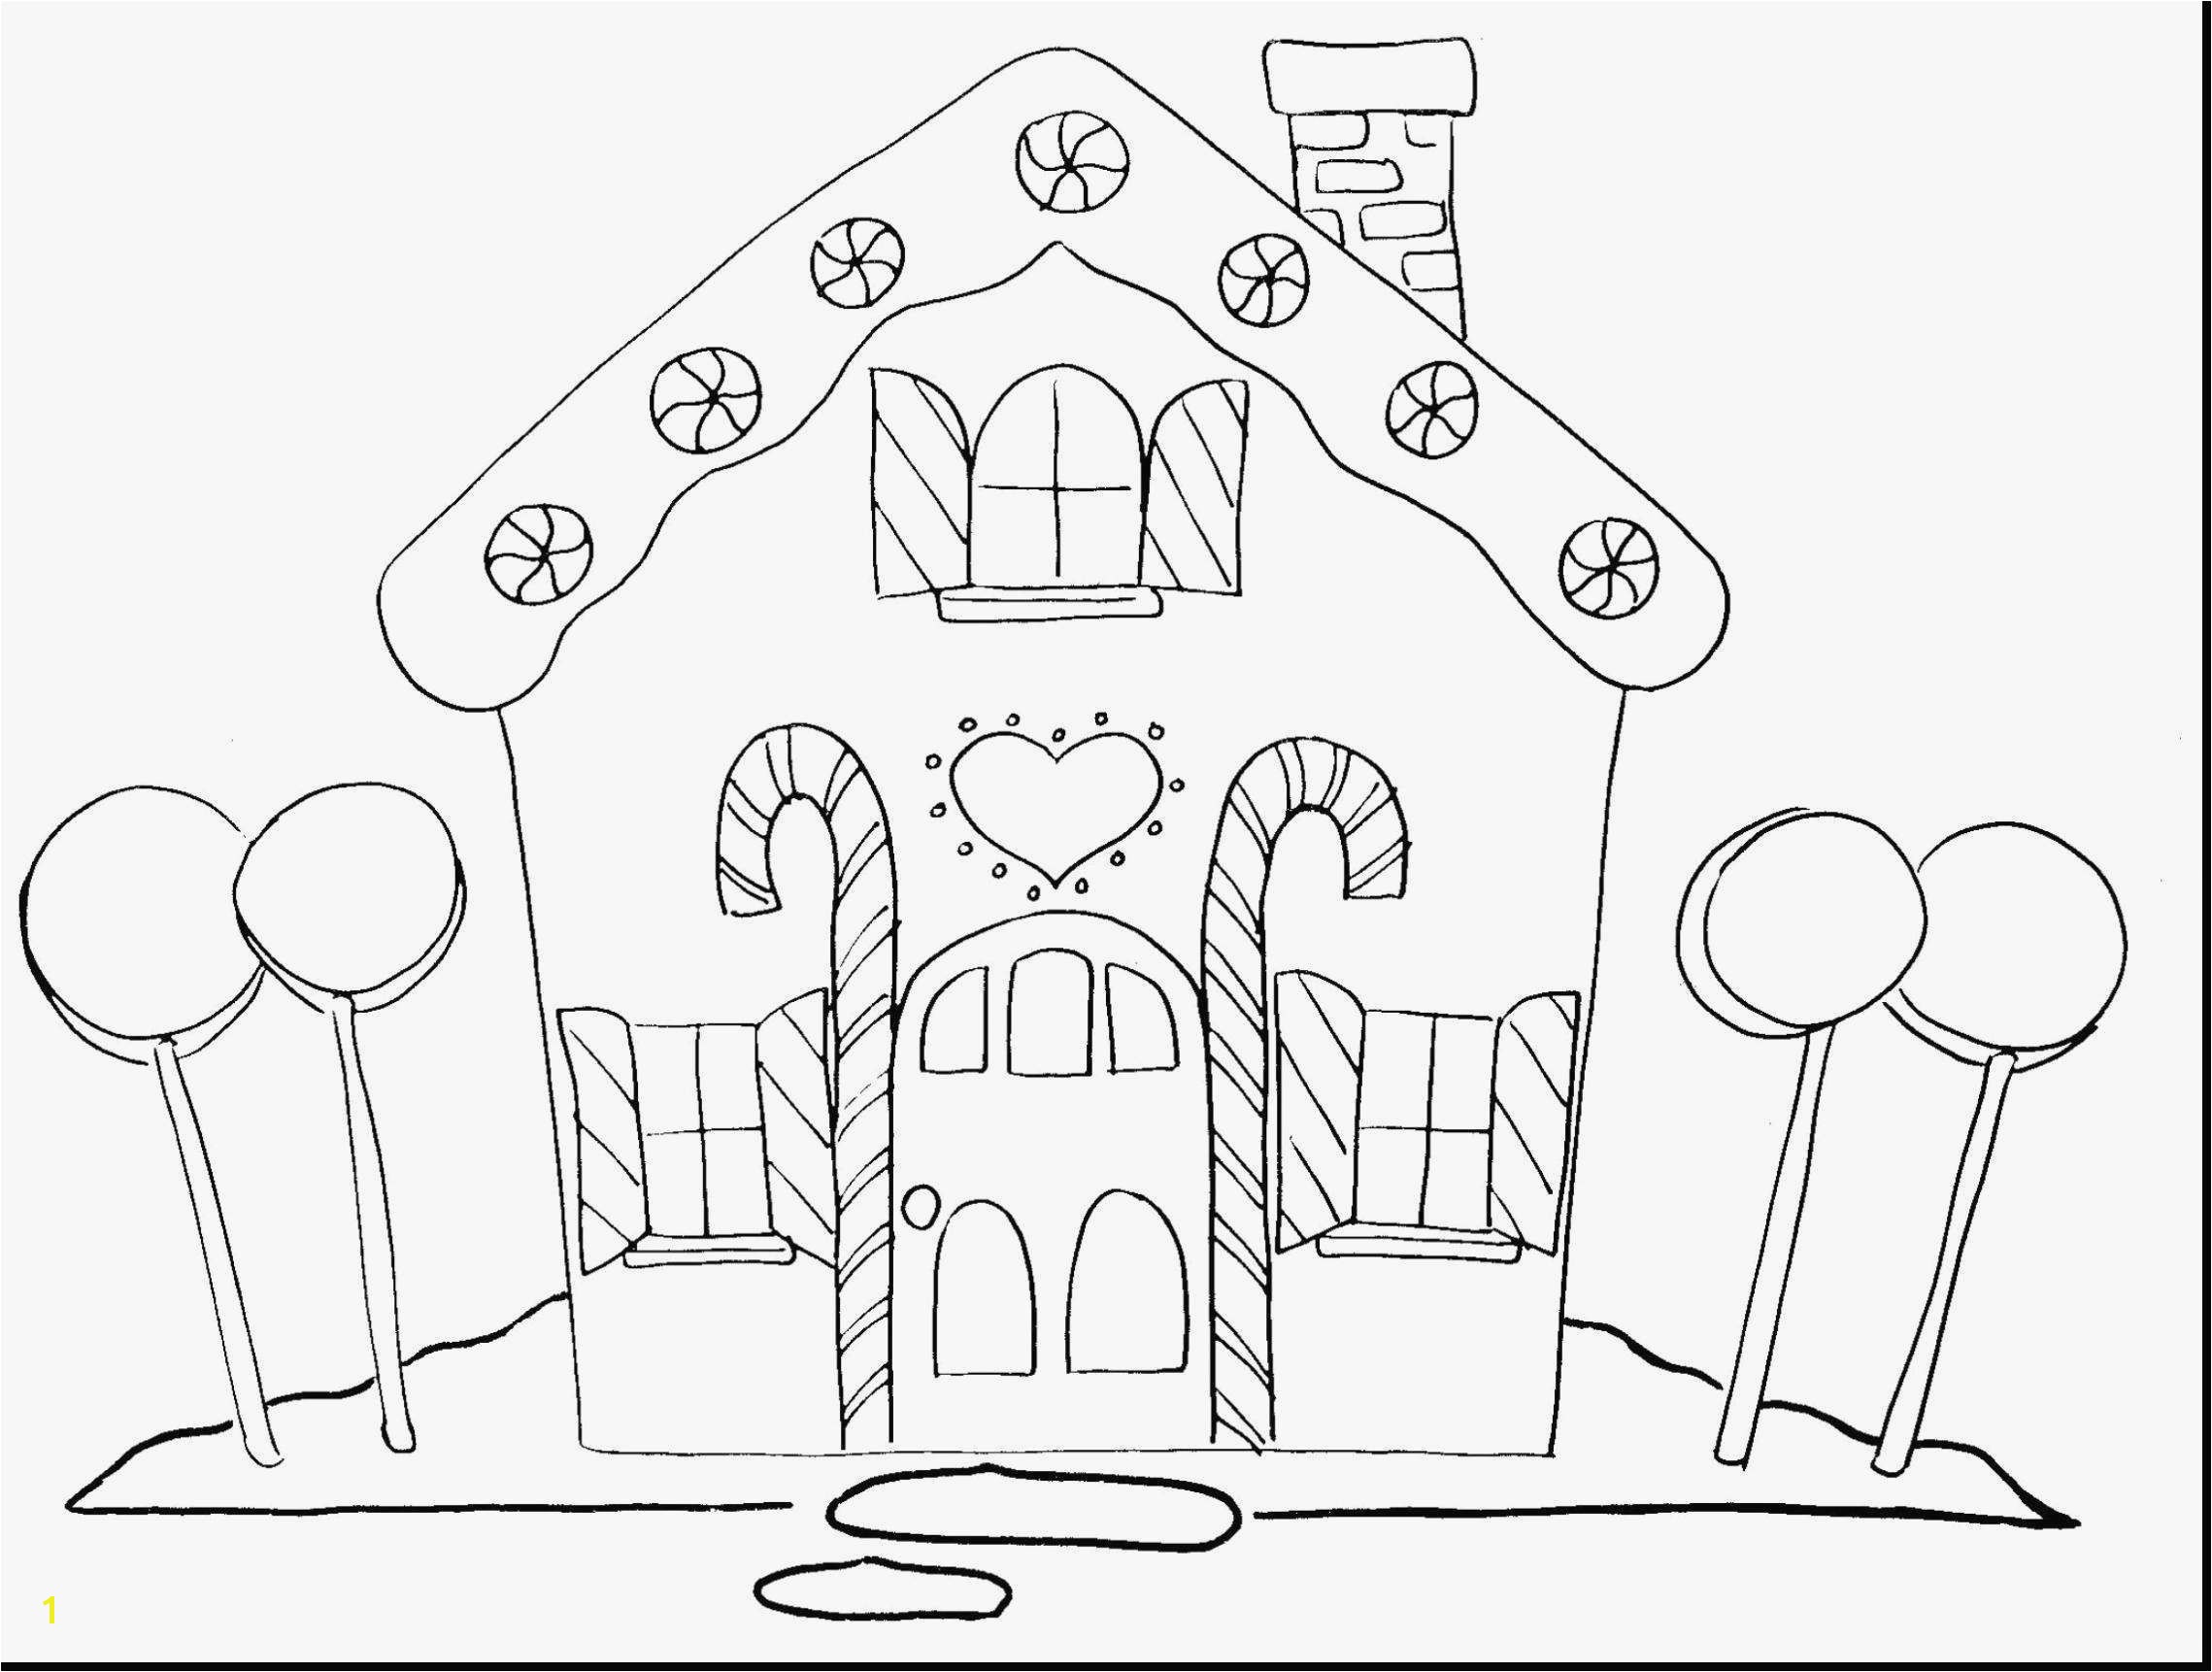 Gingerbread House Coloring Pages to Print Gingerbread House ornaments Modern Christmas ornament Coloring Page